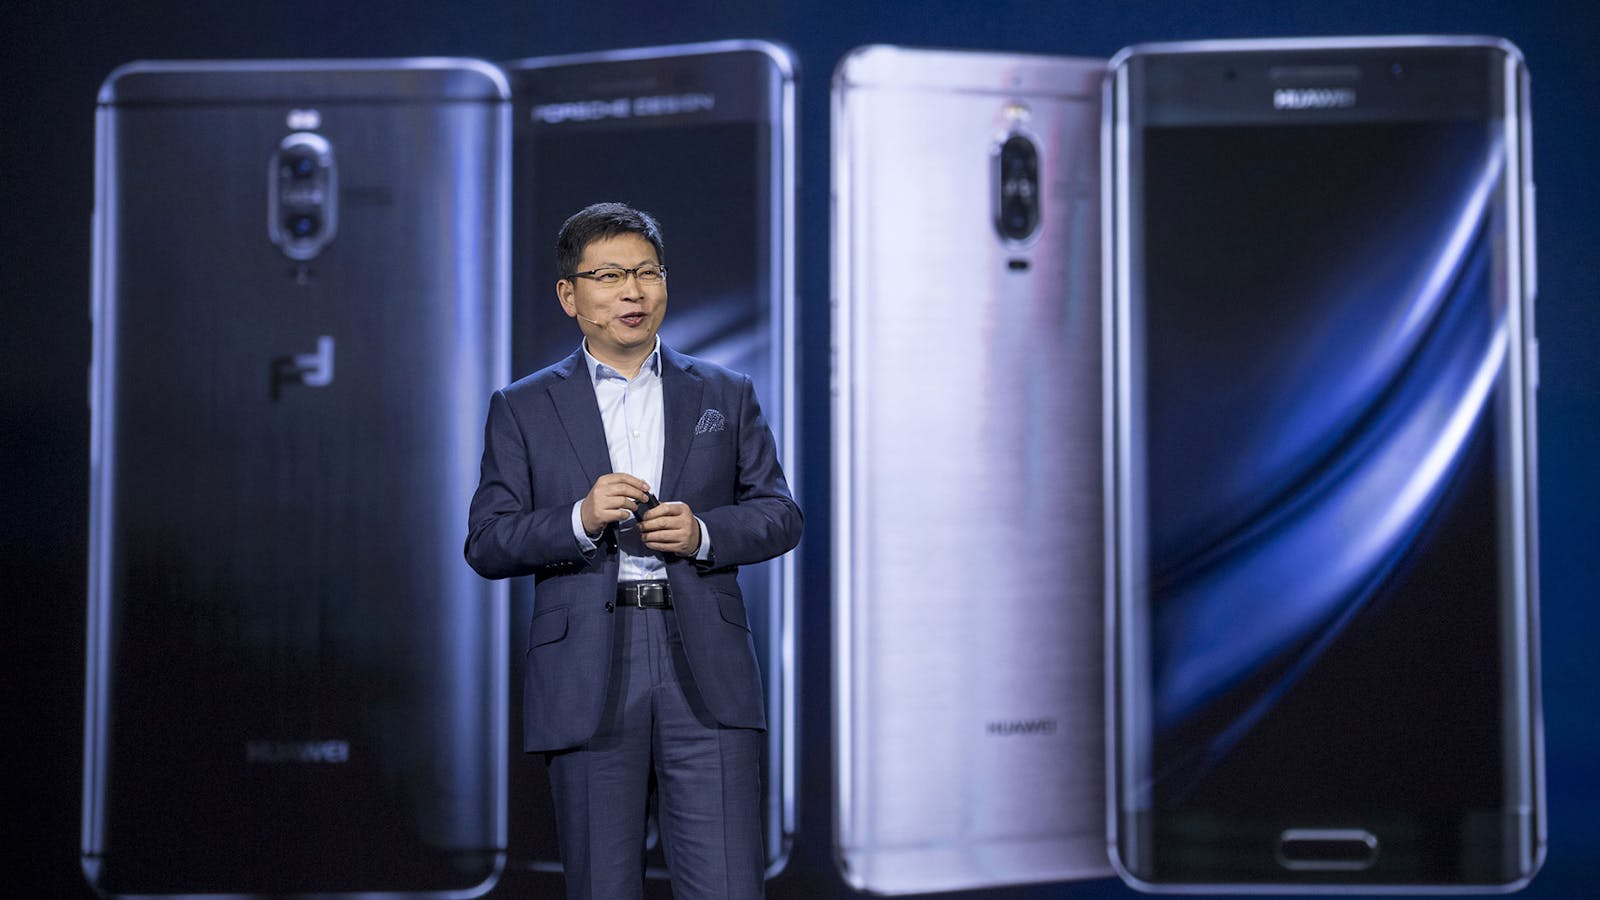 Huawei's consumer electronics division chief Richard Yu at CES this January. Photo by Bloomberg.